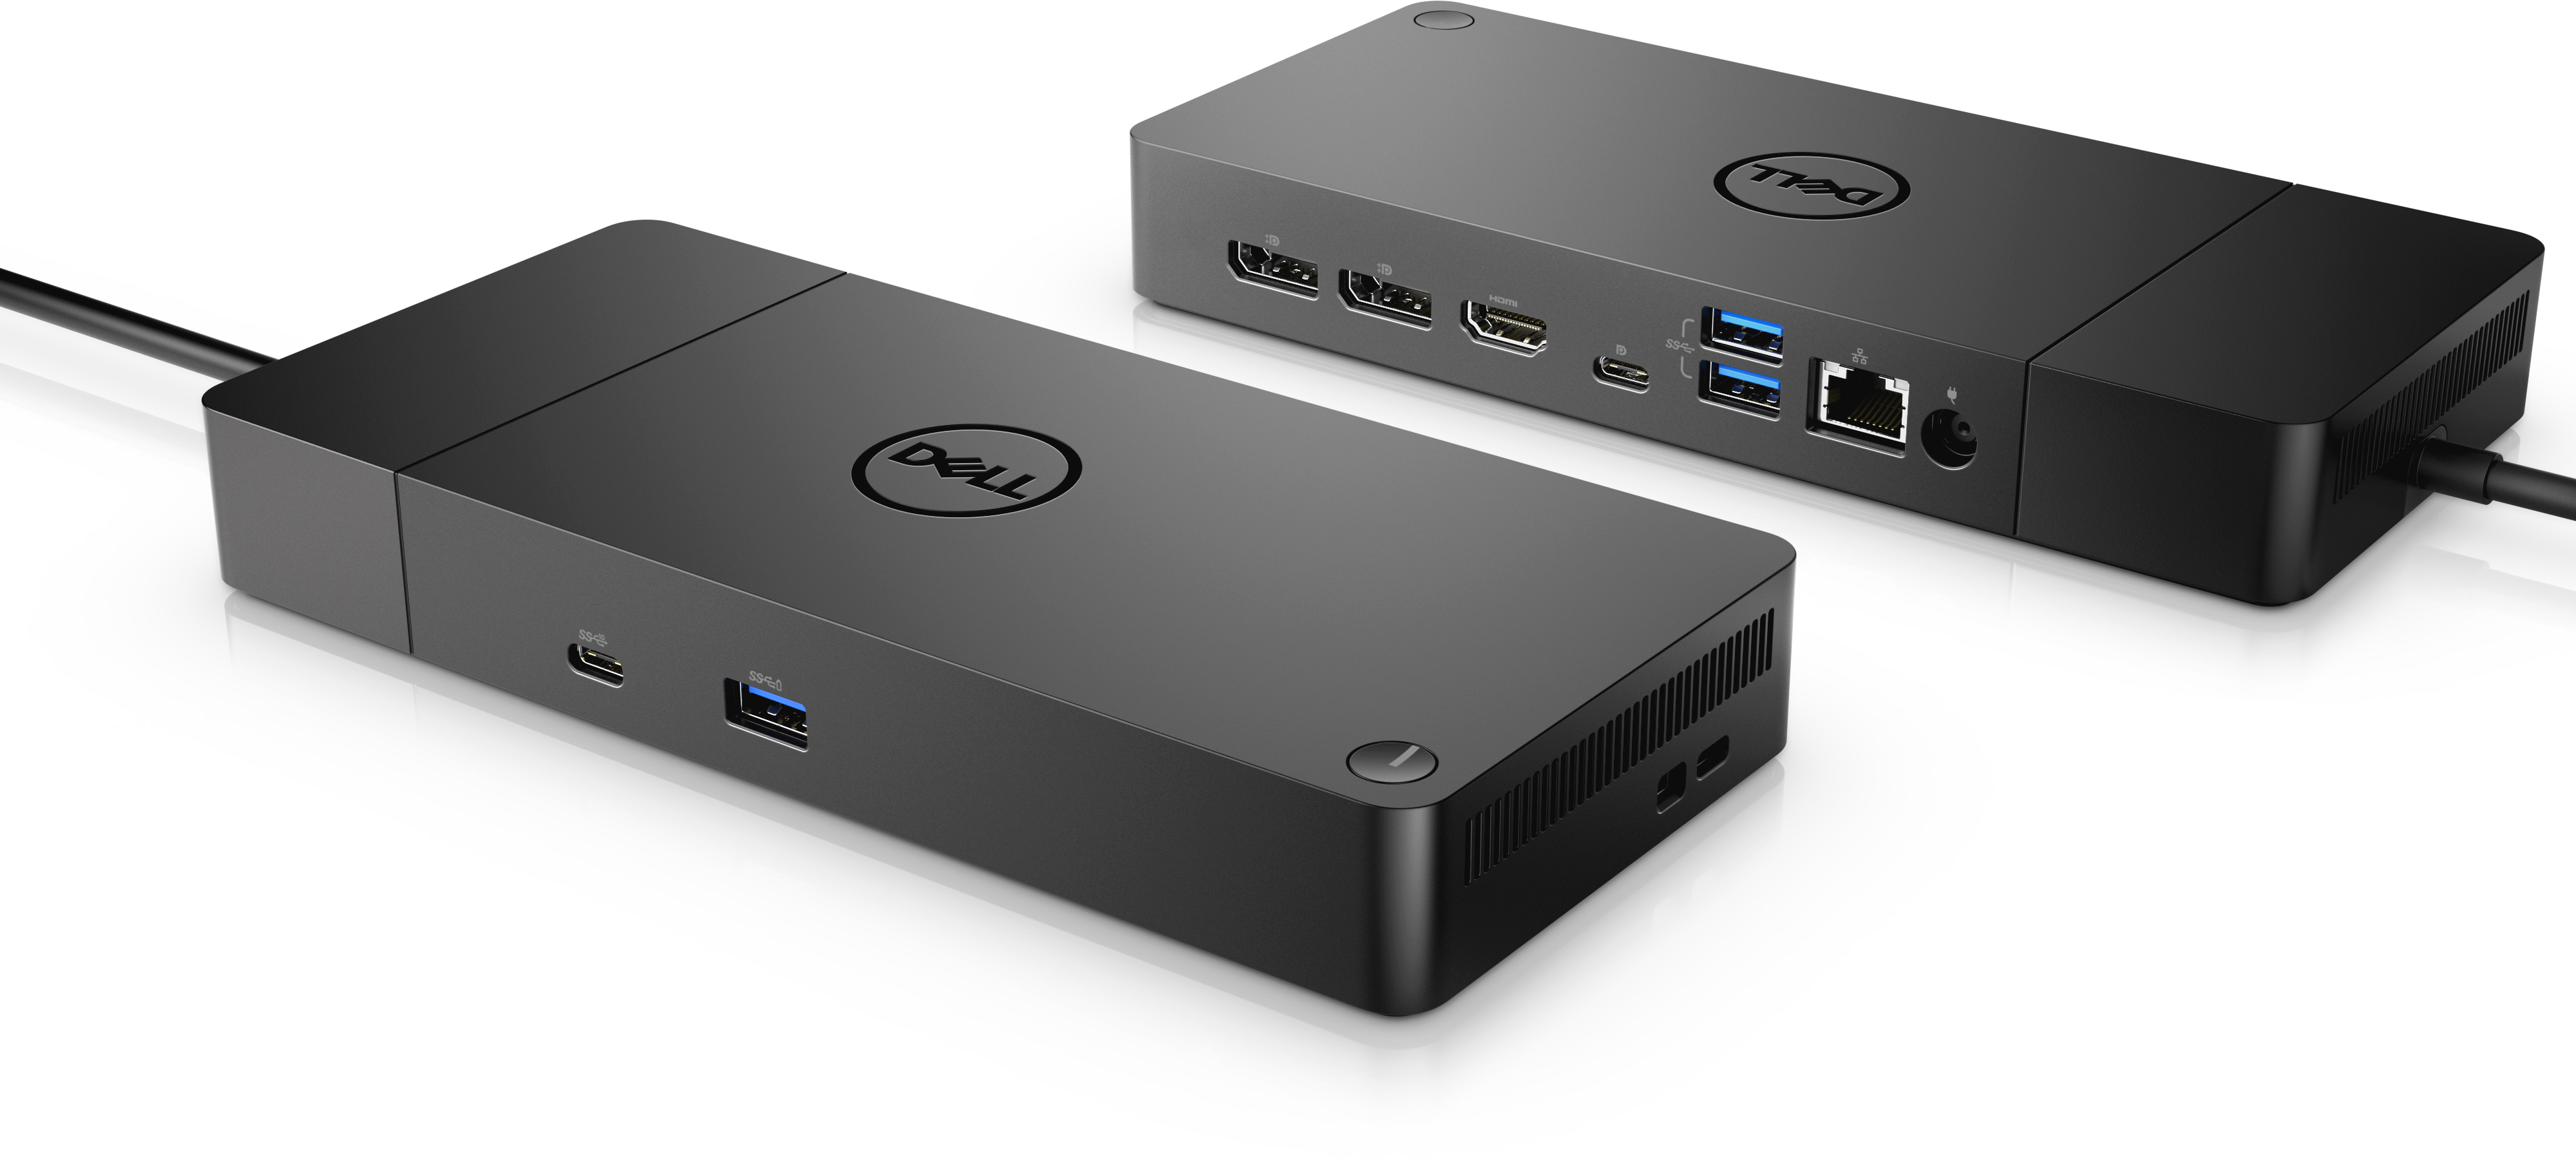 Dell 130W Laptop Computer Docking Station - WD19S